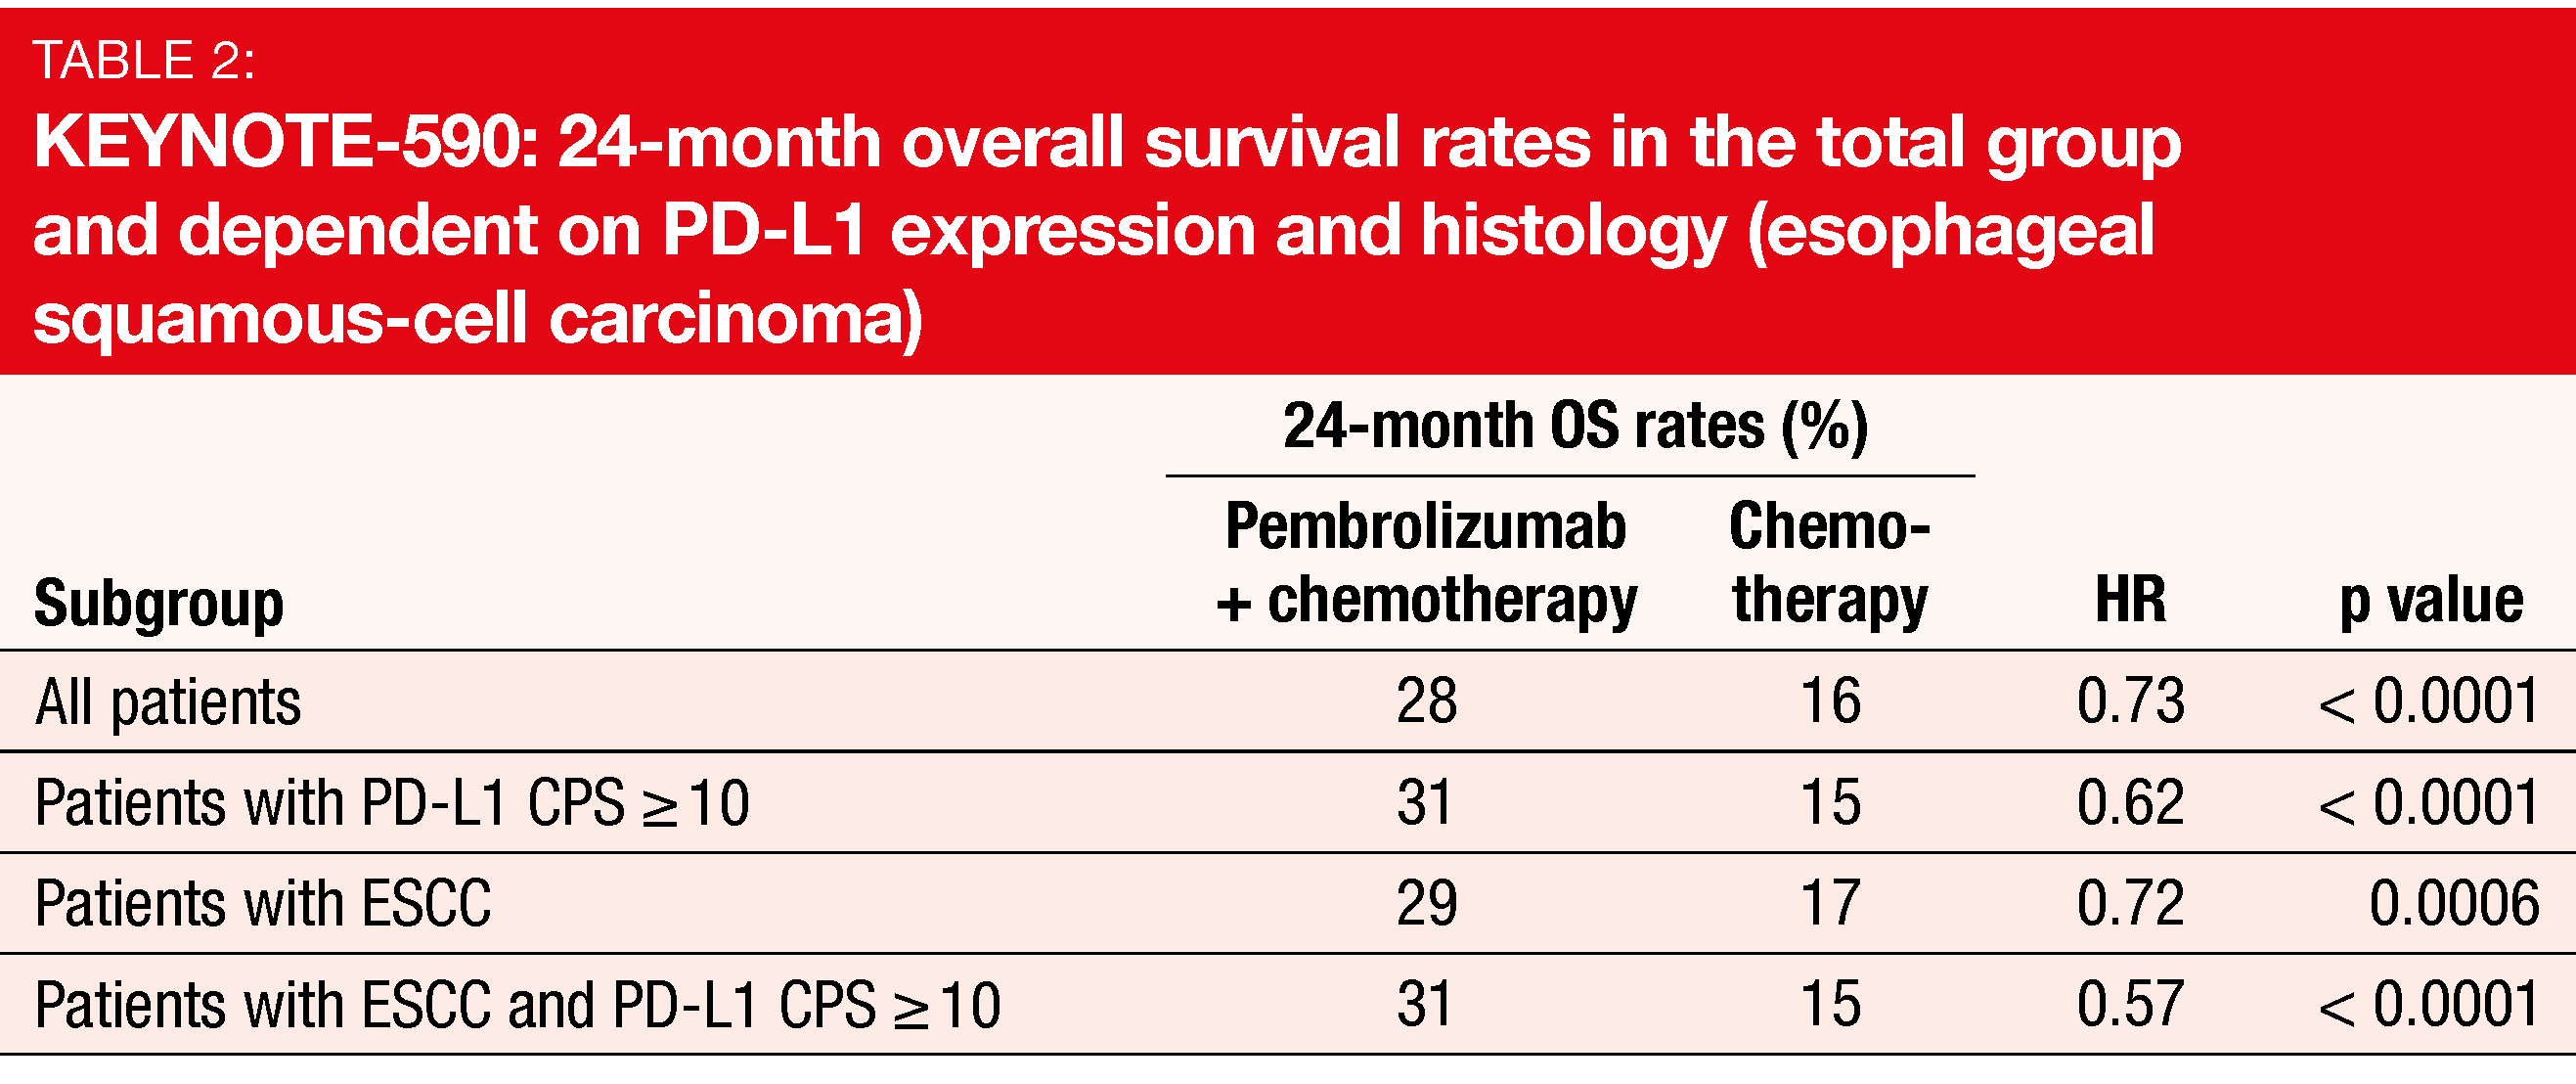 Table 2: KEYNOTE-590: 24-month overall survival rates in the total group and dependent on PD-L1 expression and histology (esophageal squamous-cell carcinoma)